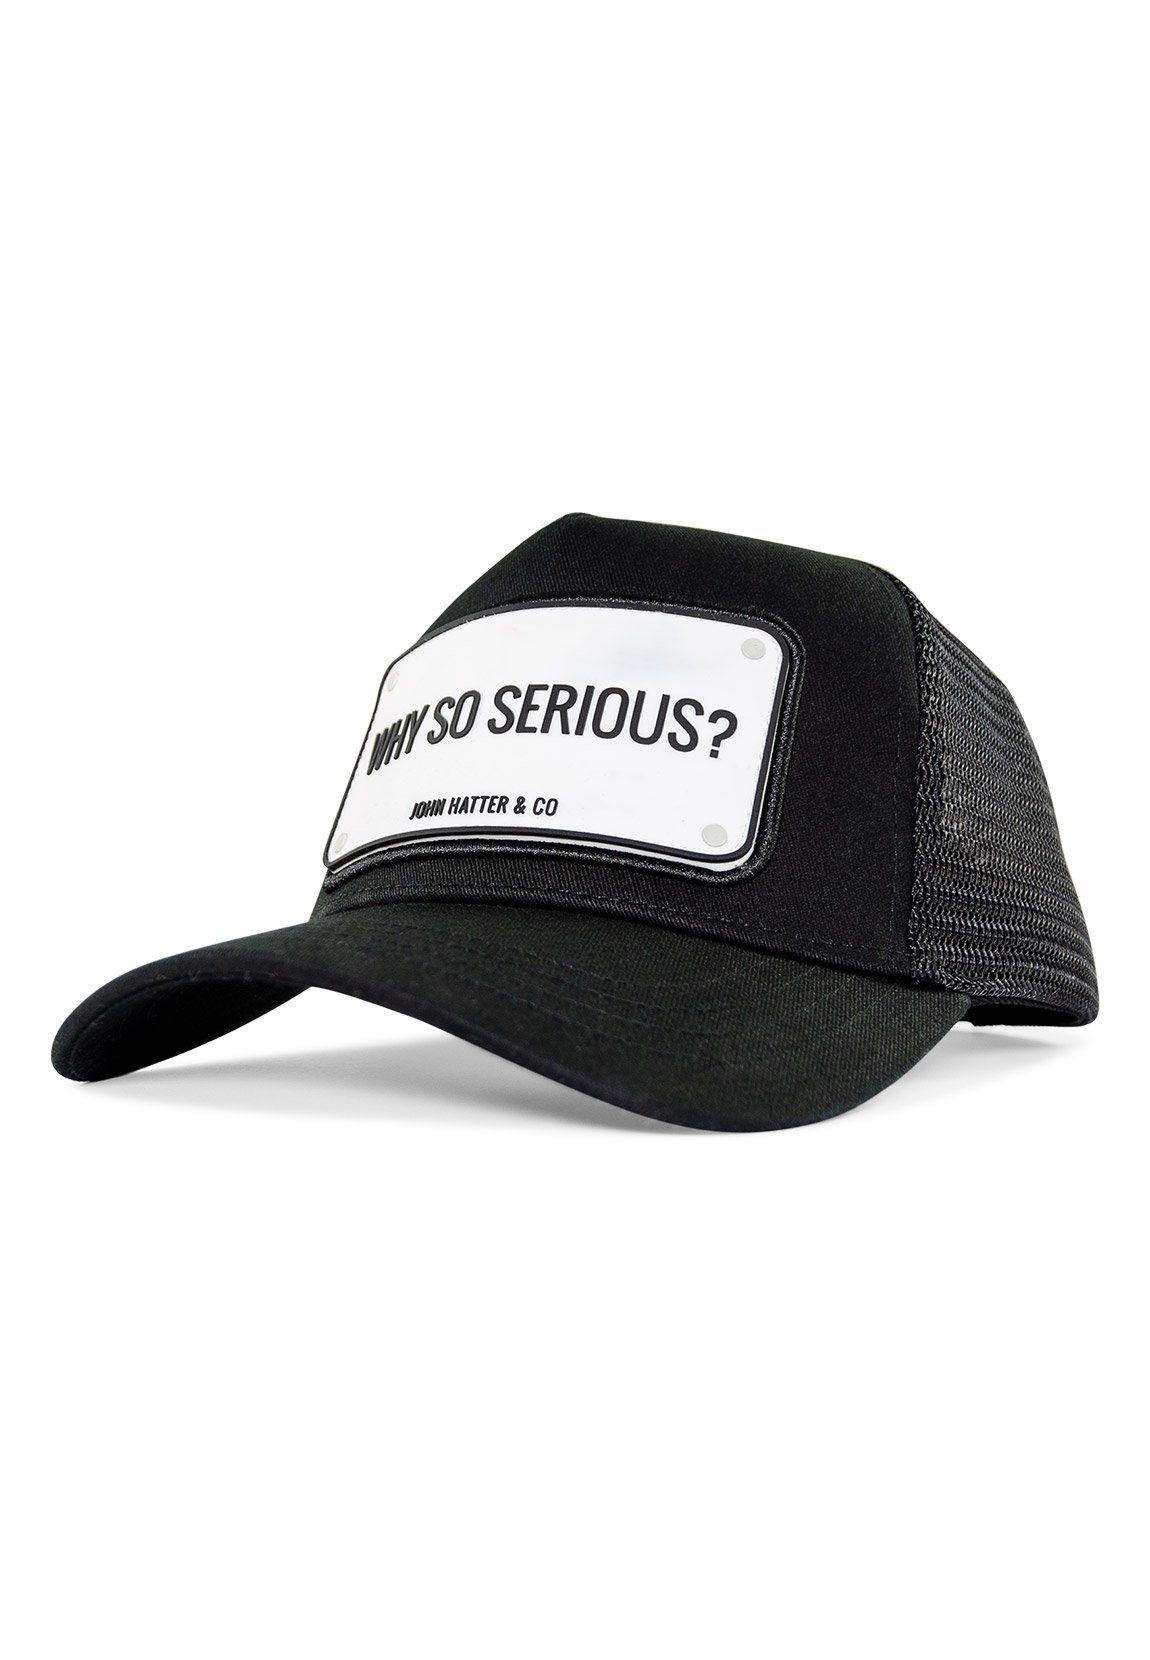 John Hatter & Co. Trucker Cap John Hatter & Co Trucker Cap WHY SO SERIOUS? Rubber Black